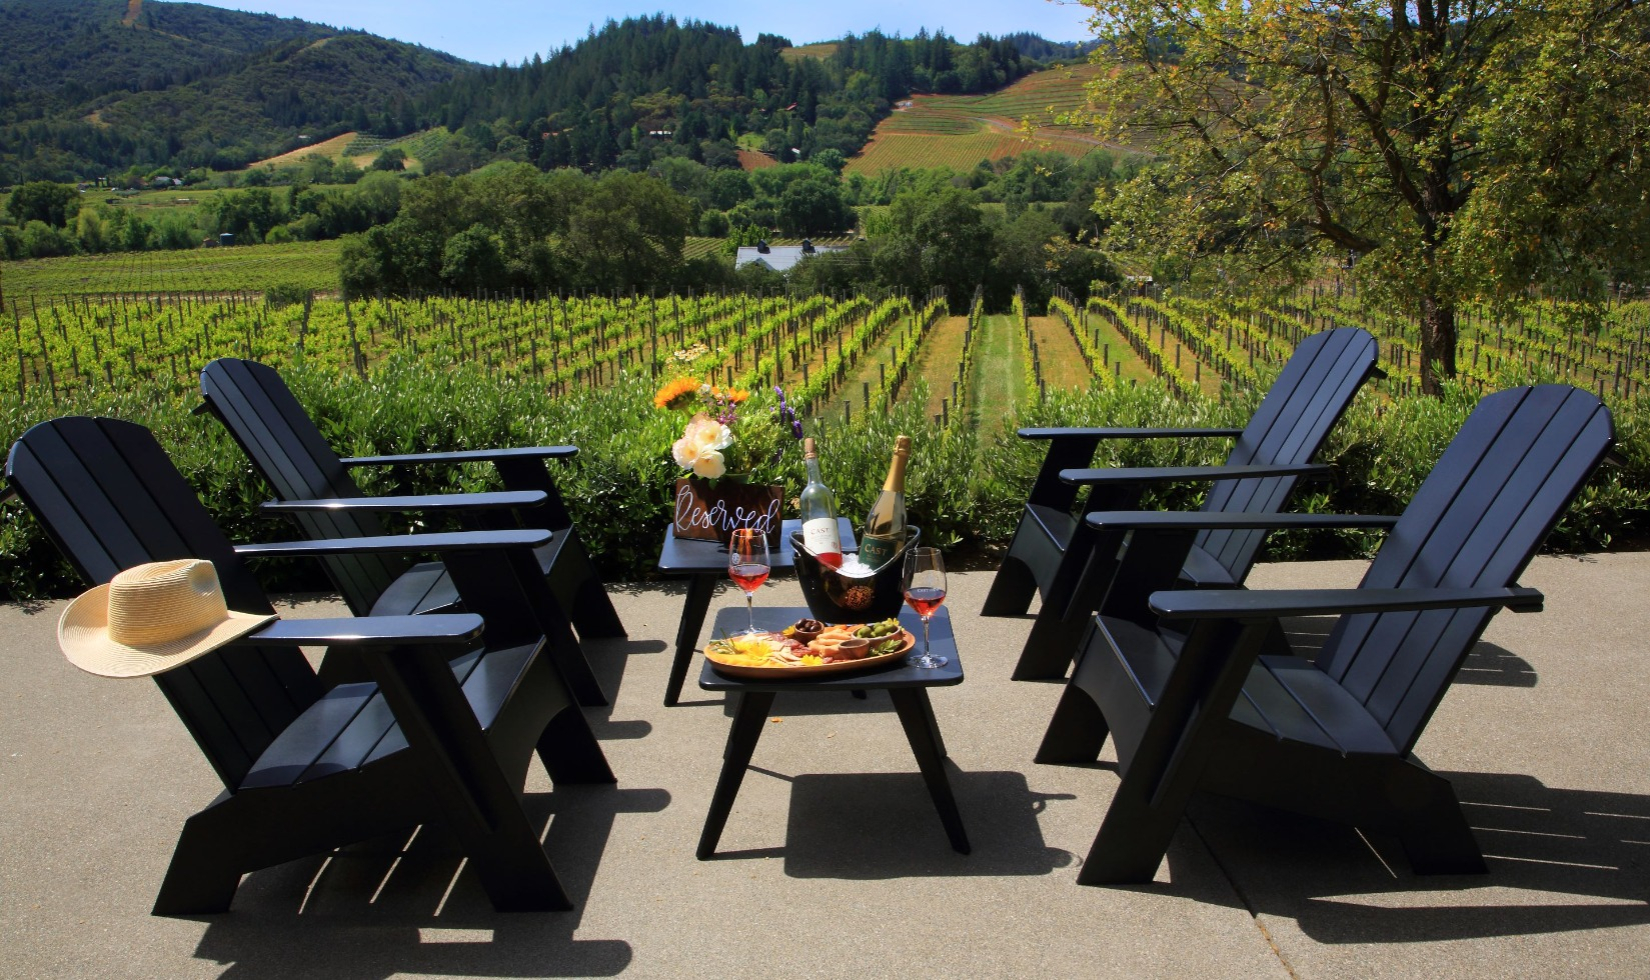 Adirondack chairs on terrace by vineyard with wine on table in ice buckets and chacuterie board